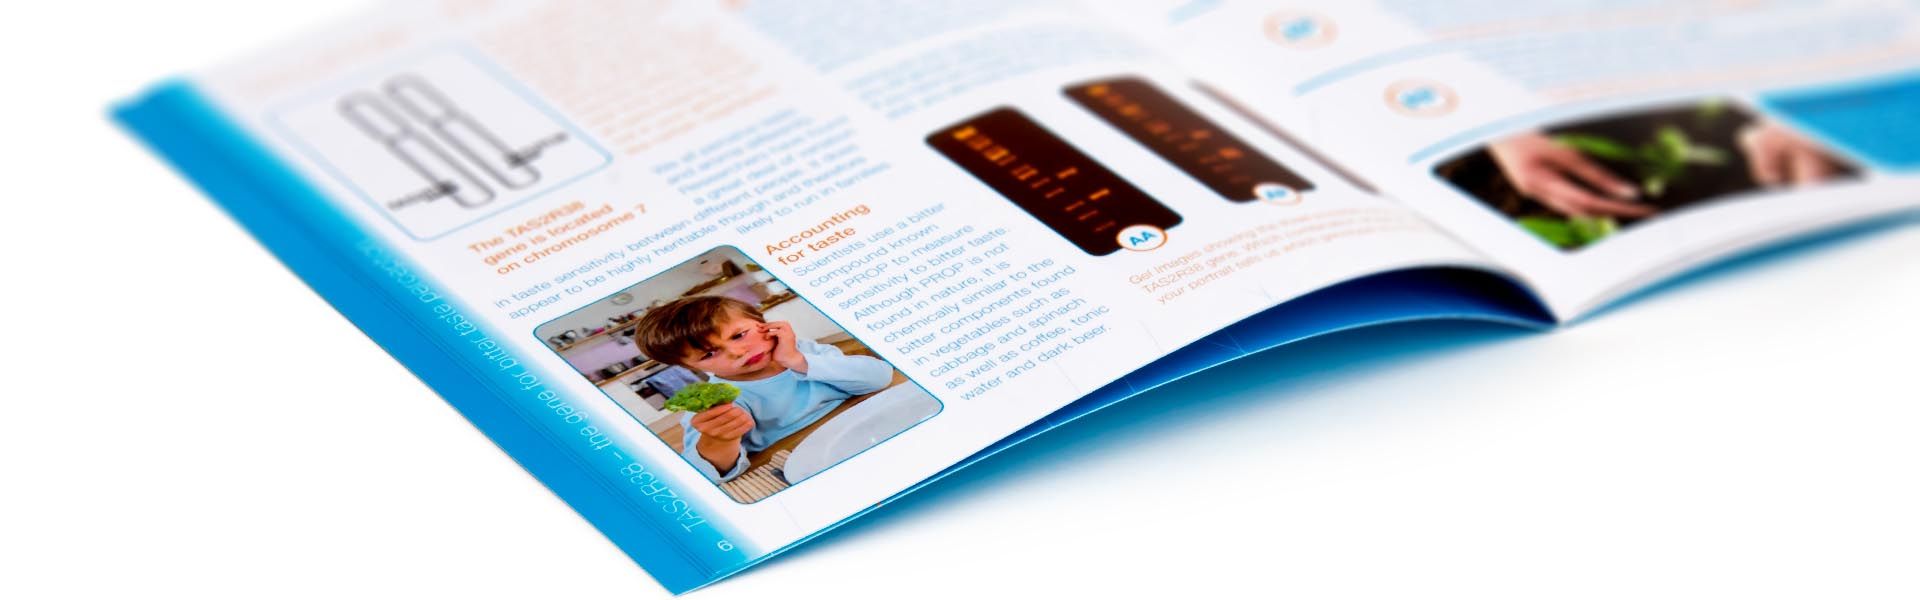 a brochure is open to a page about accounting for taste